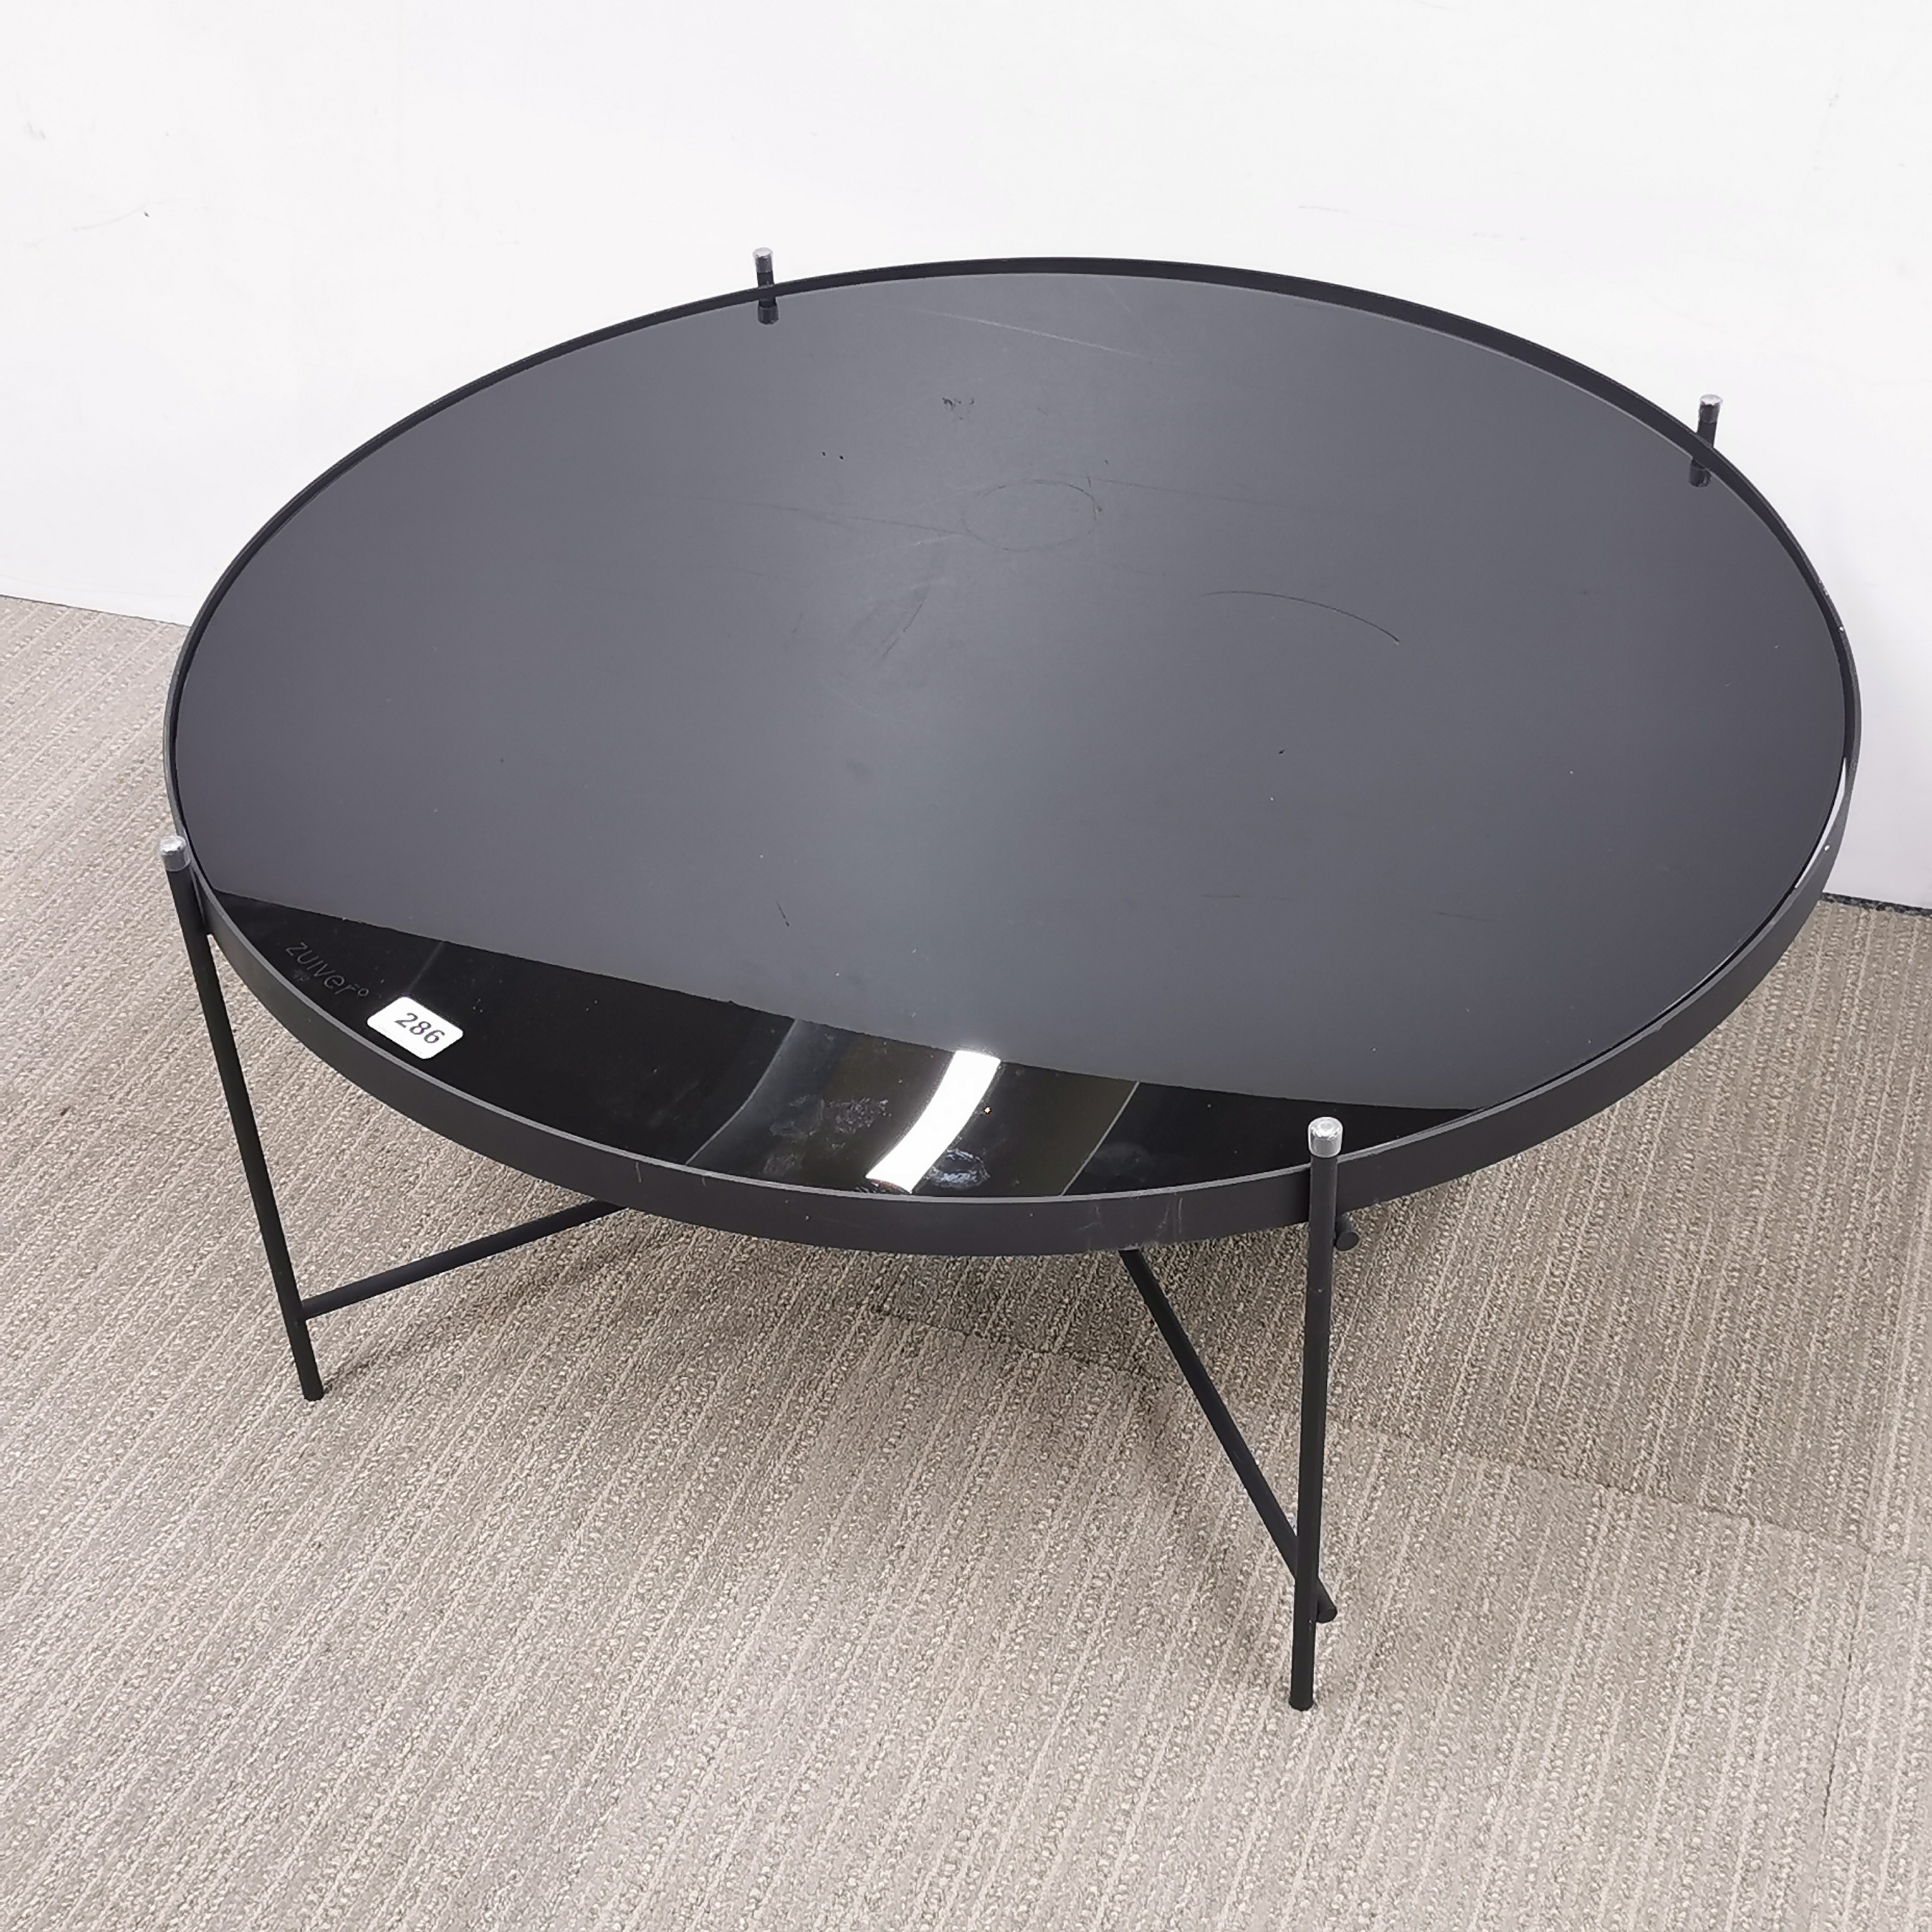 A Zuiver plate glass topped metal coffee table, Dia. 81cm H. 33cm. - Image 2 of 3